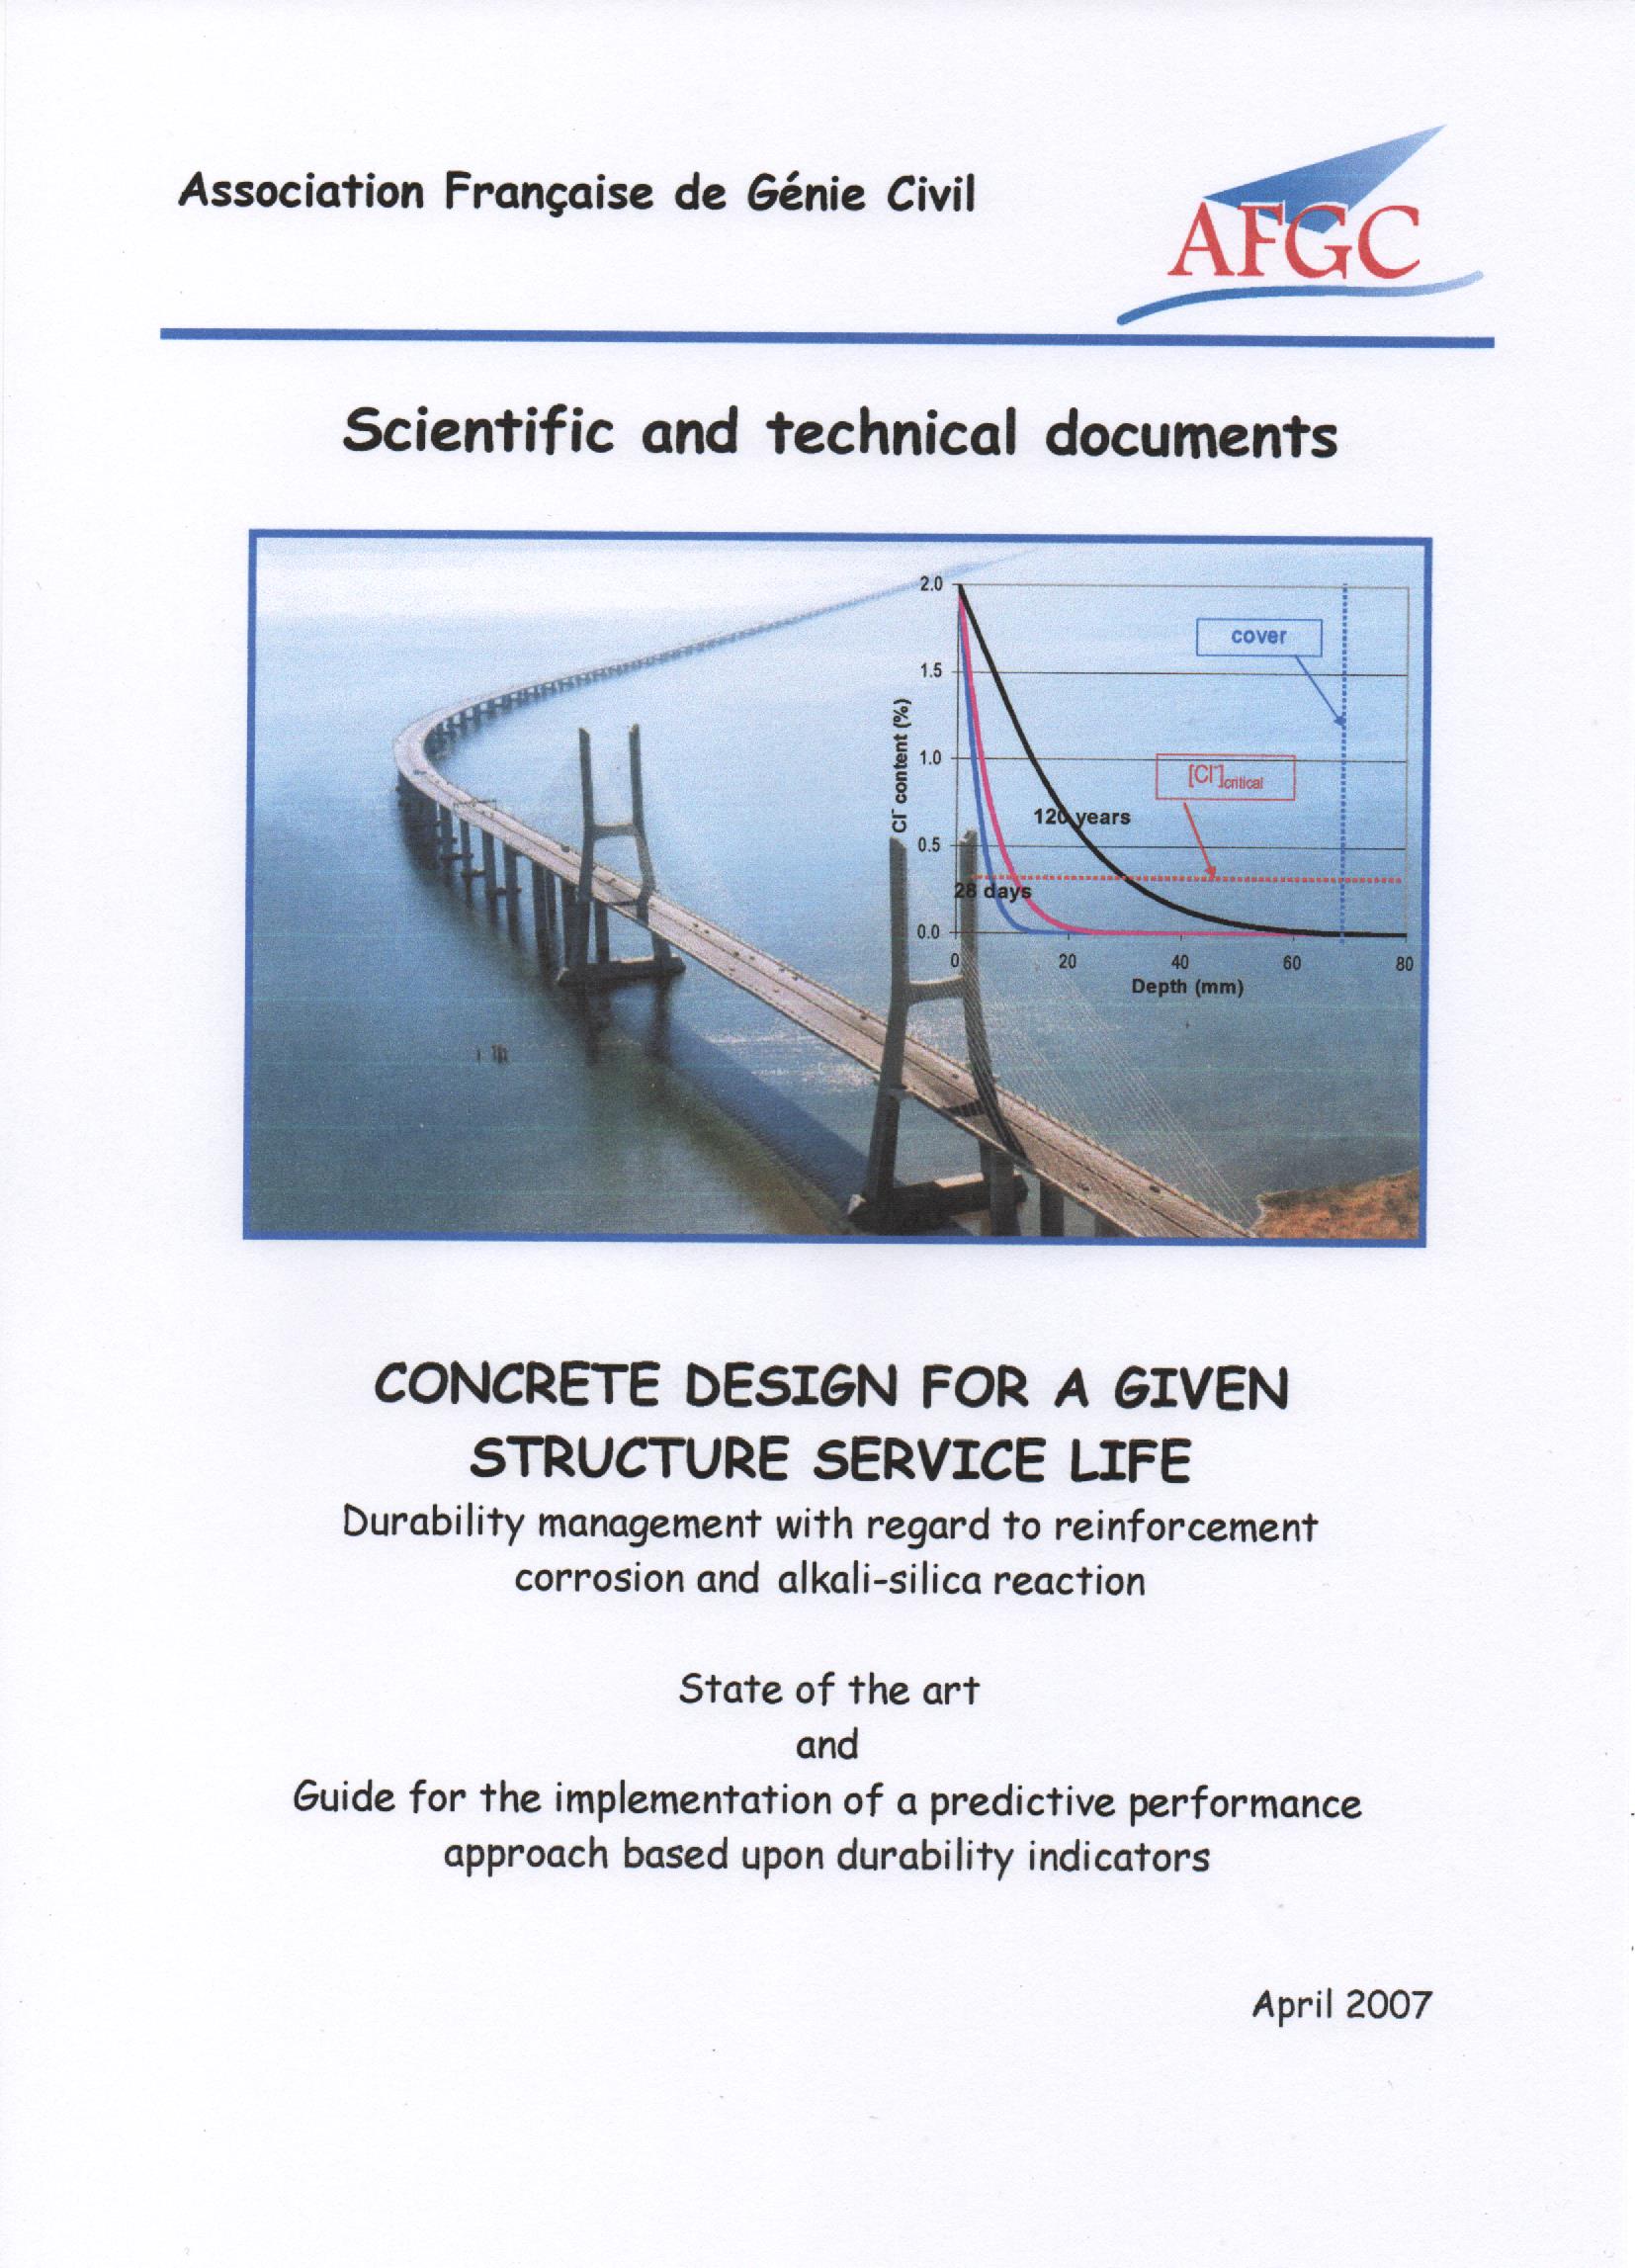 Concrete Design for a given structure service life – Durability management with regard to reinforcement corrosion and alkali-silica reaction